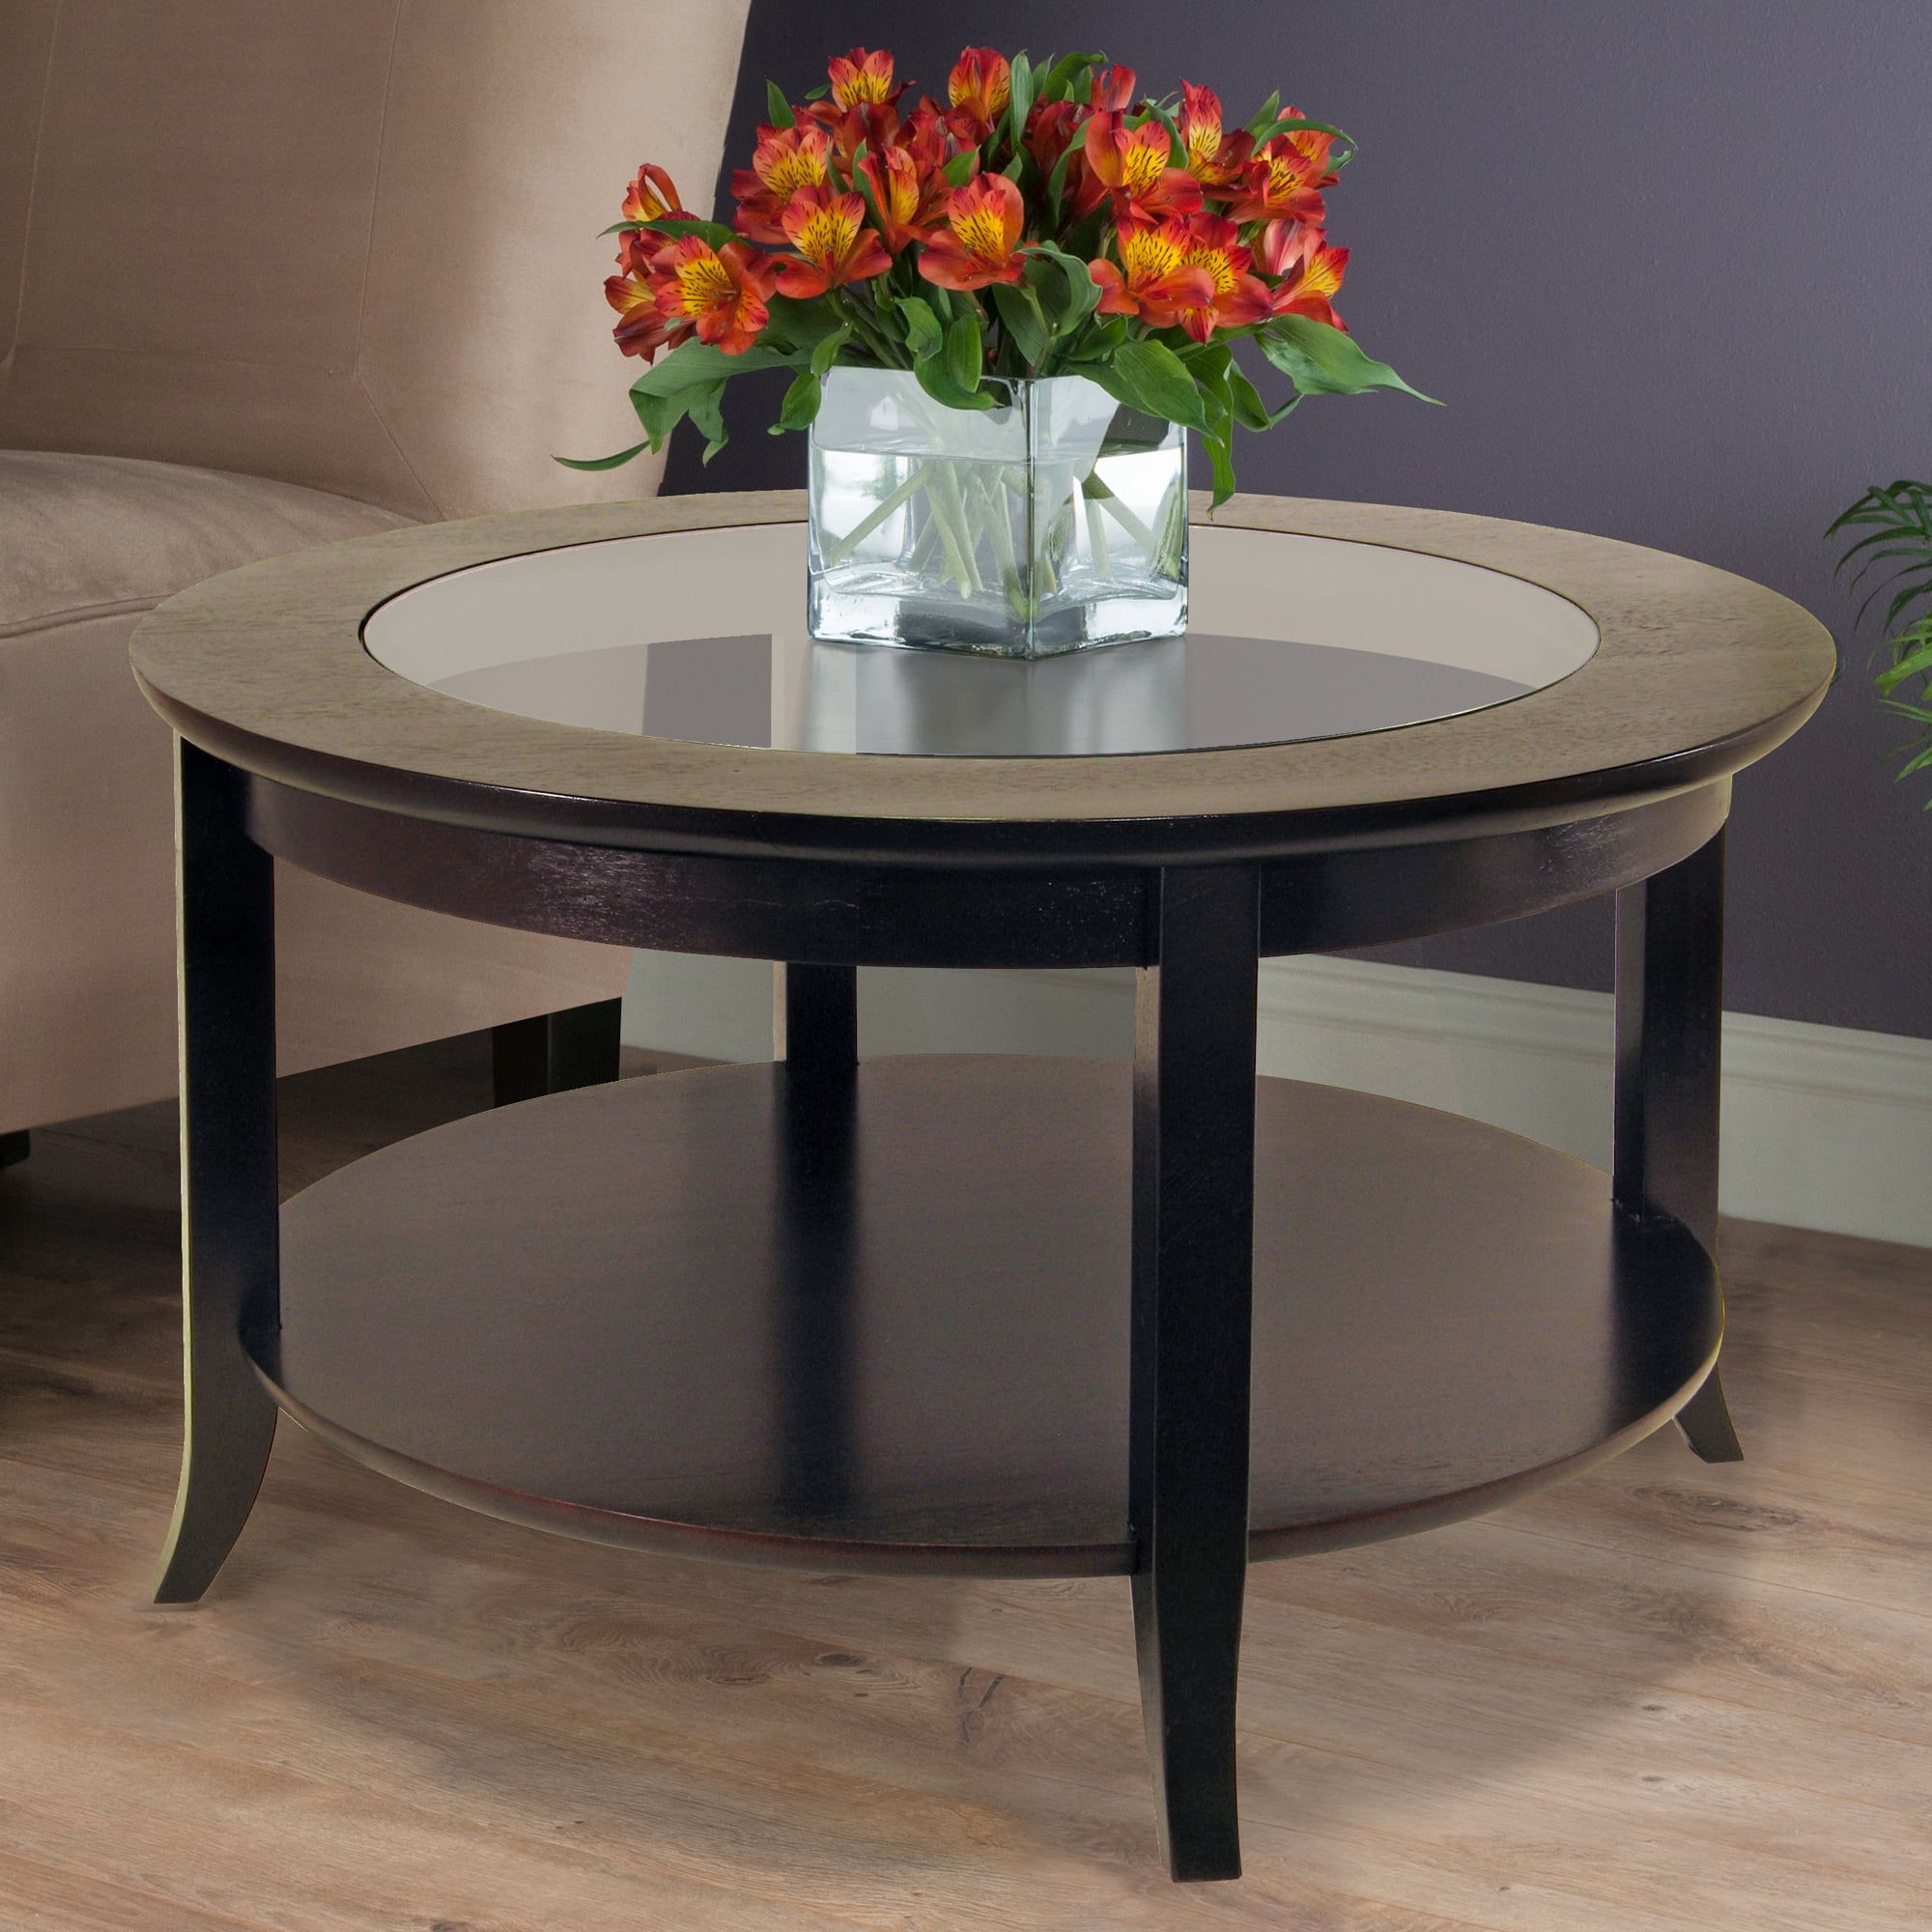 Winsome Wood Genoa Round Coffee Table With Glass Top, Espresso Finish Within Wood Tempered Glass Top Coffee Tables (View 15 of 15)